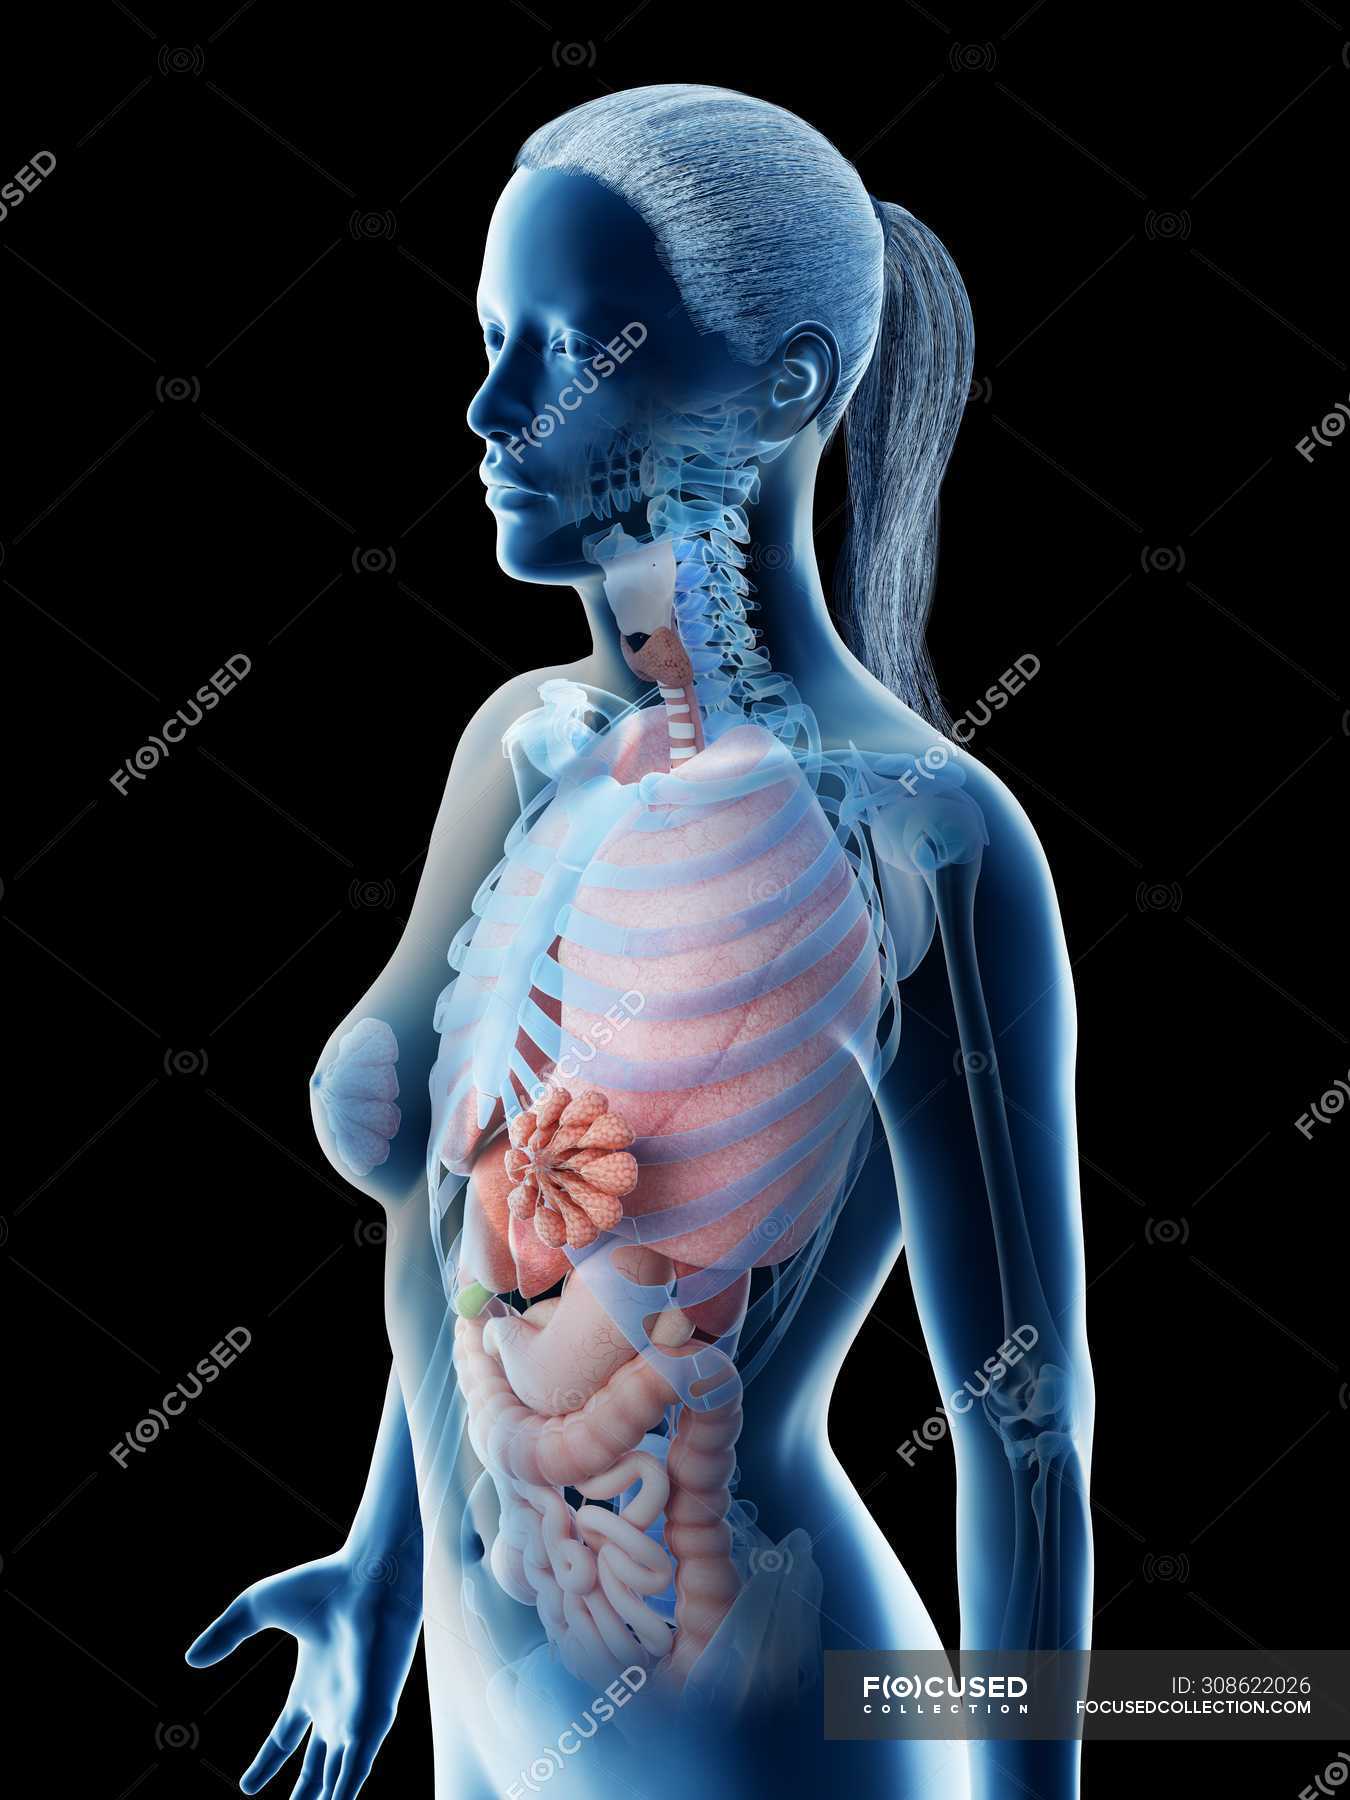 Human Body Model Showing Female Anatomy With Internal Organs Digital 3d Render Illustration Normal Colon Stock Photo 308622026